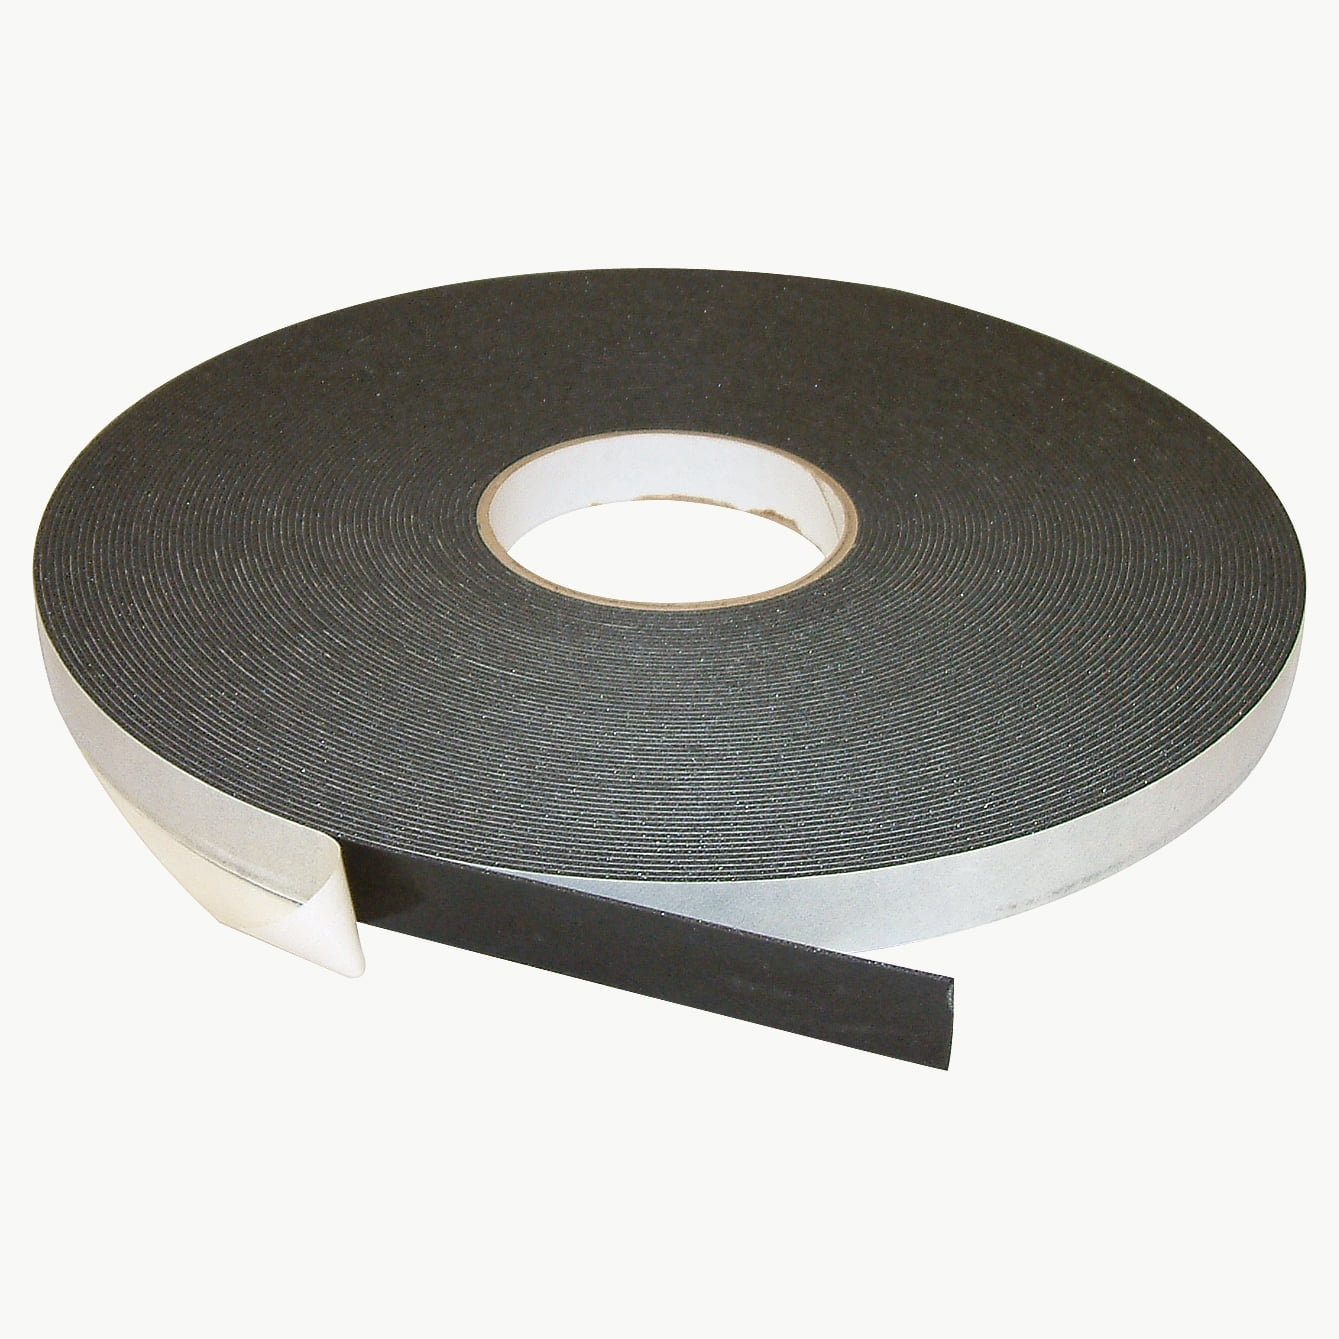 thick x 3/4 in JVCC DC-PEF06A Double-Sided Foam Tape: 1/16 in x 36 yds. Black 